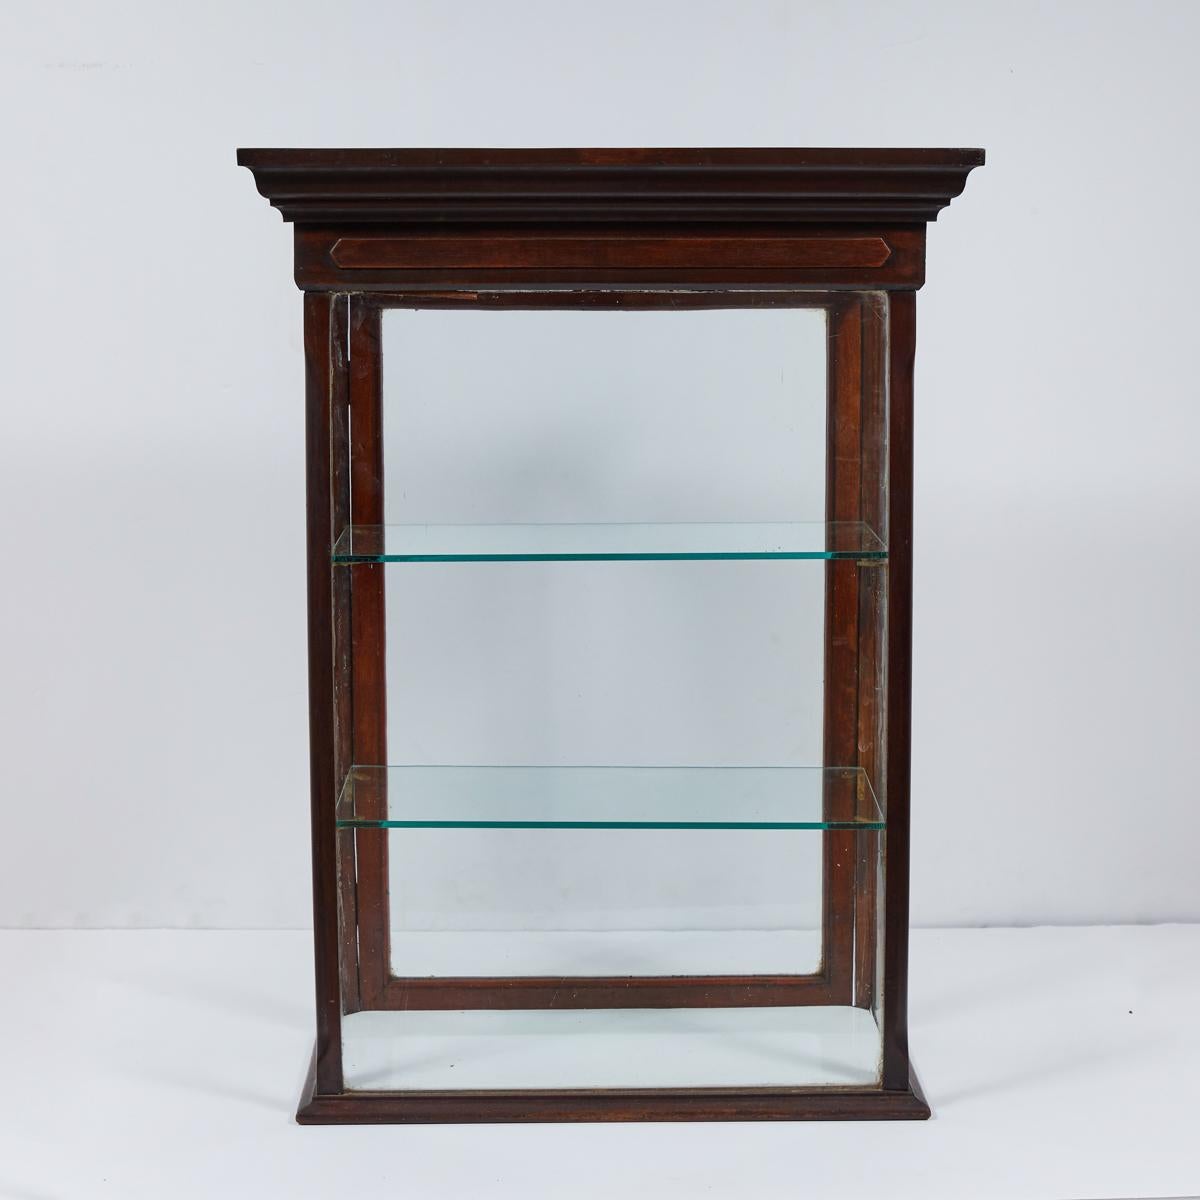 Tabletop display case or with glass walls and shelves and deep cherry-toned wooden siding from 1880s England. The beveled cornice gives the piece an elevated, architectural finish. Because there is glass on all sides, the piece can be displayed as a